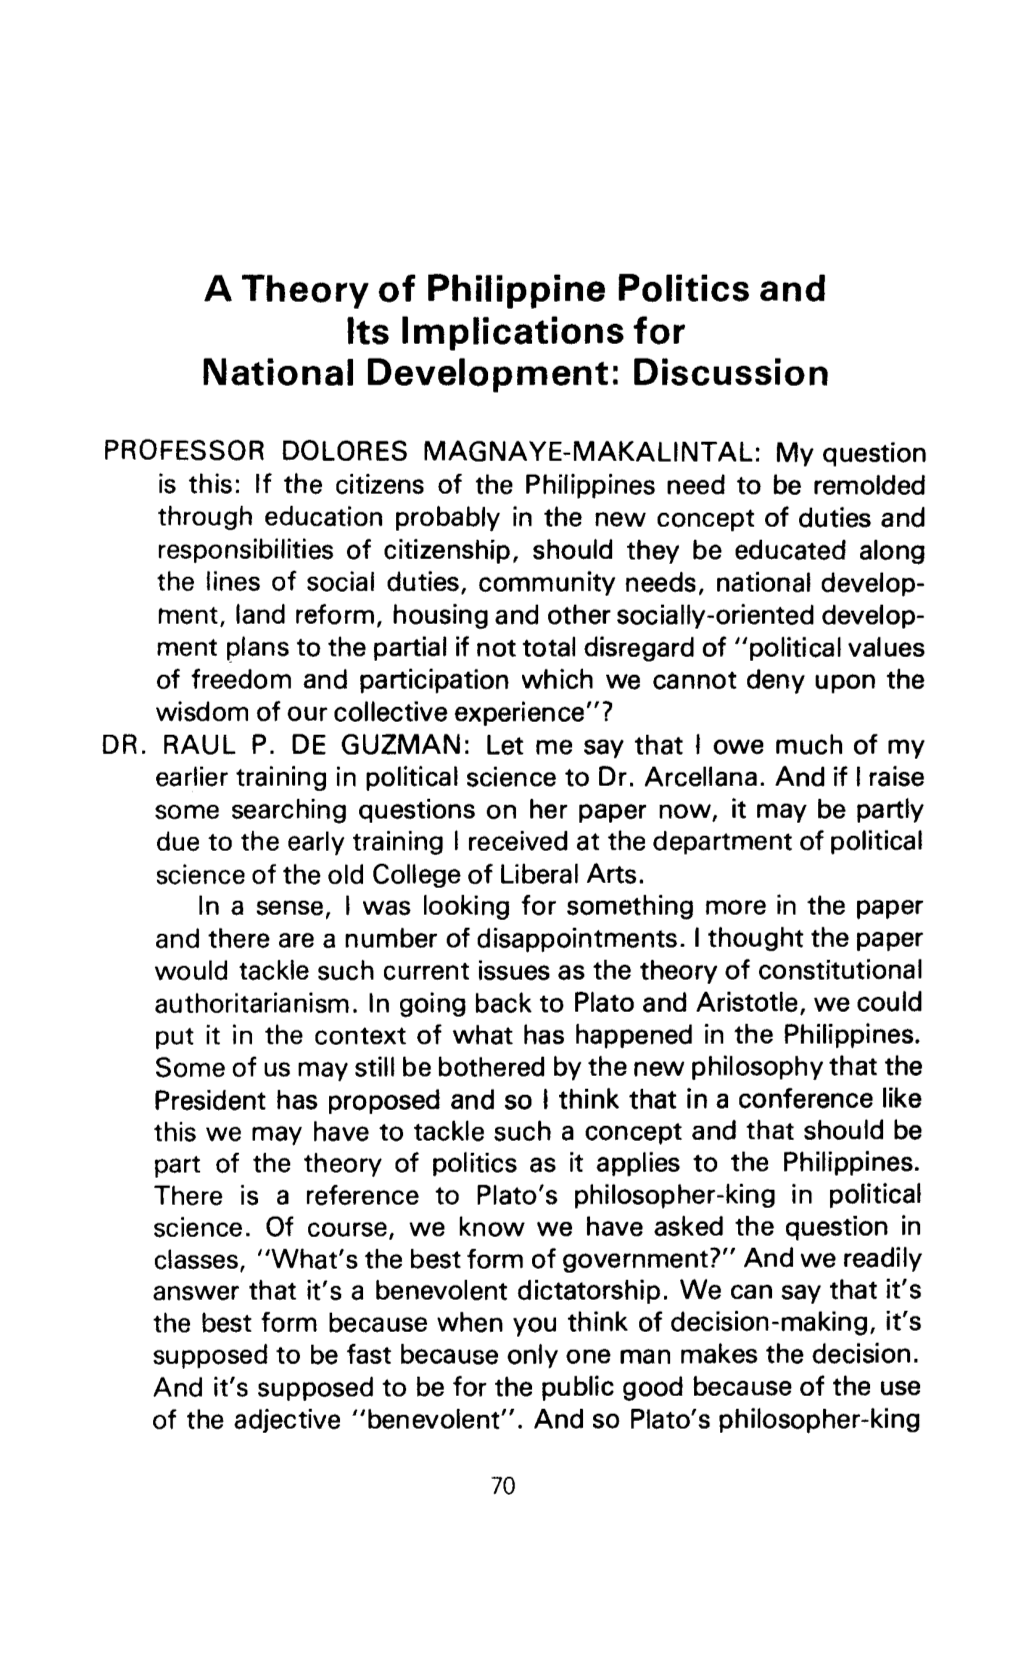 A Theory of Philippine Politics and Its Implications for National Development: Discussion